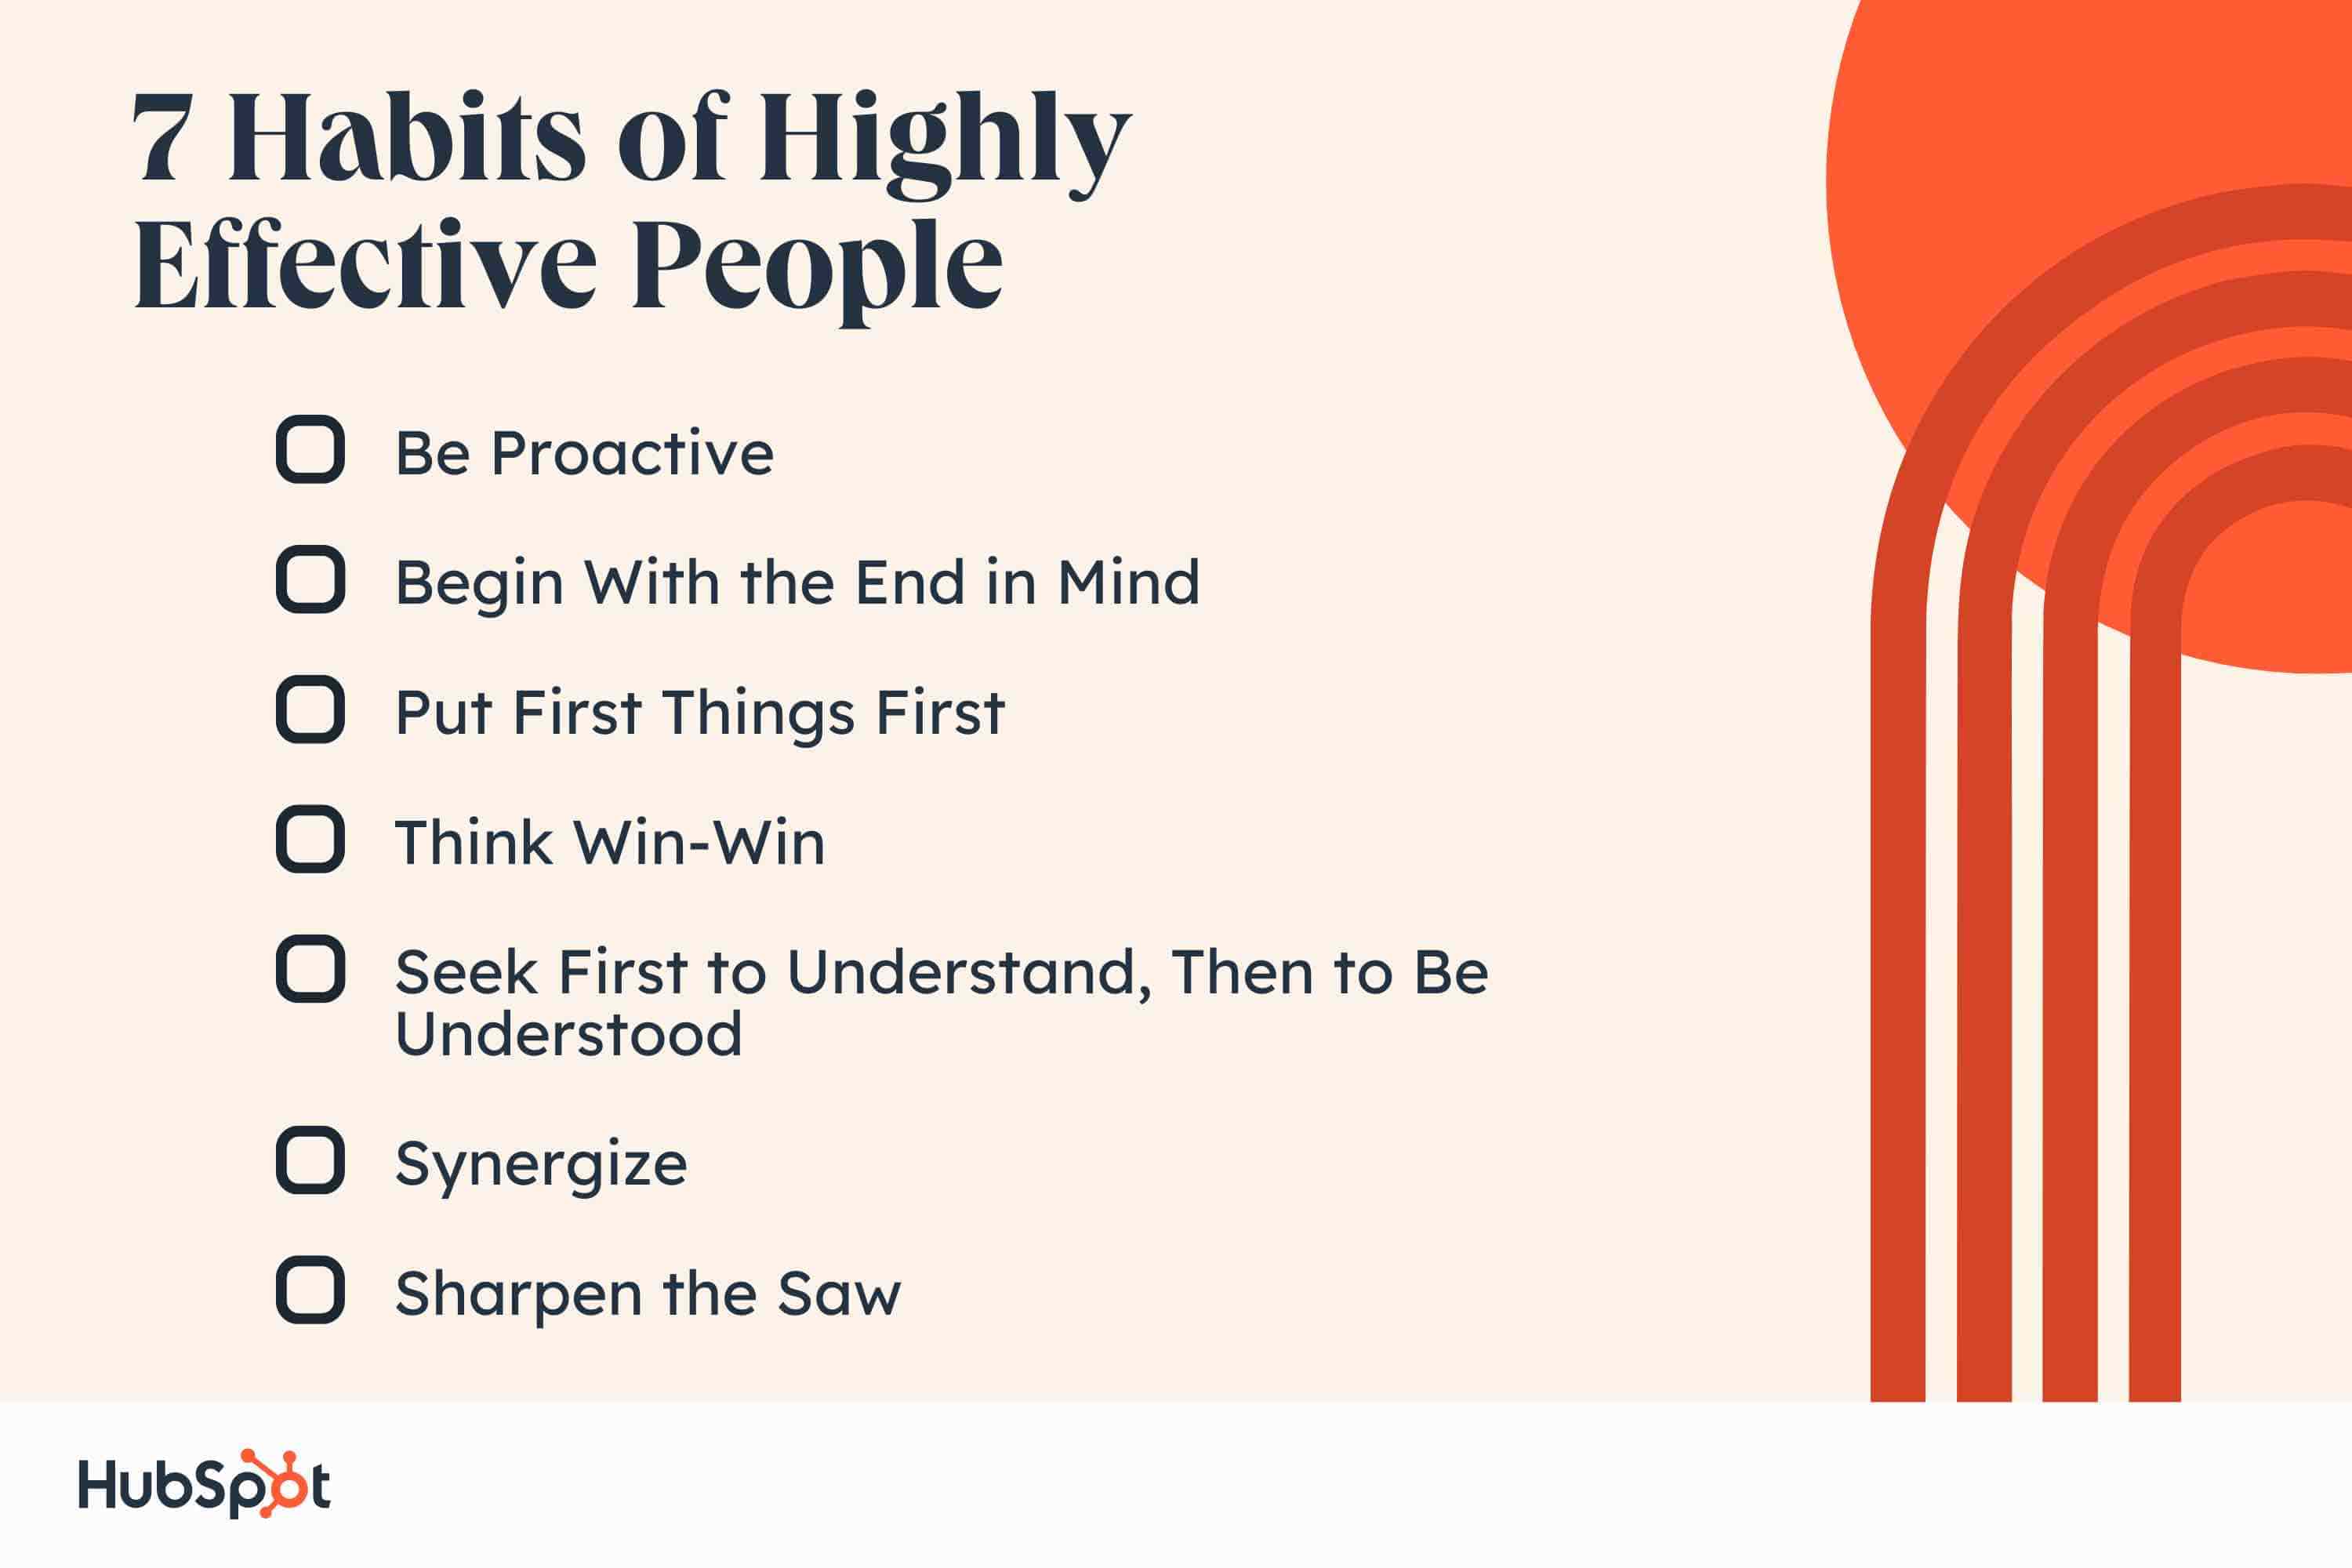 7 habits of highly effective people. Be Proactive. Begin With the End in Mind. Put First Things First. Think Win-Win. Seek First to Understand, Then to Be Understood. Synergize. Sharpen the Saw.